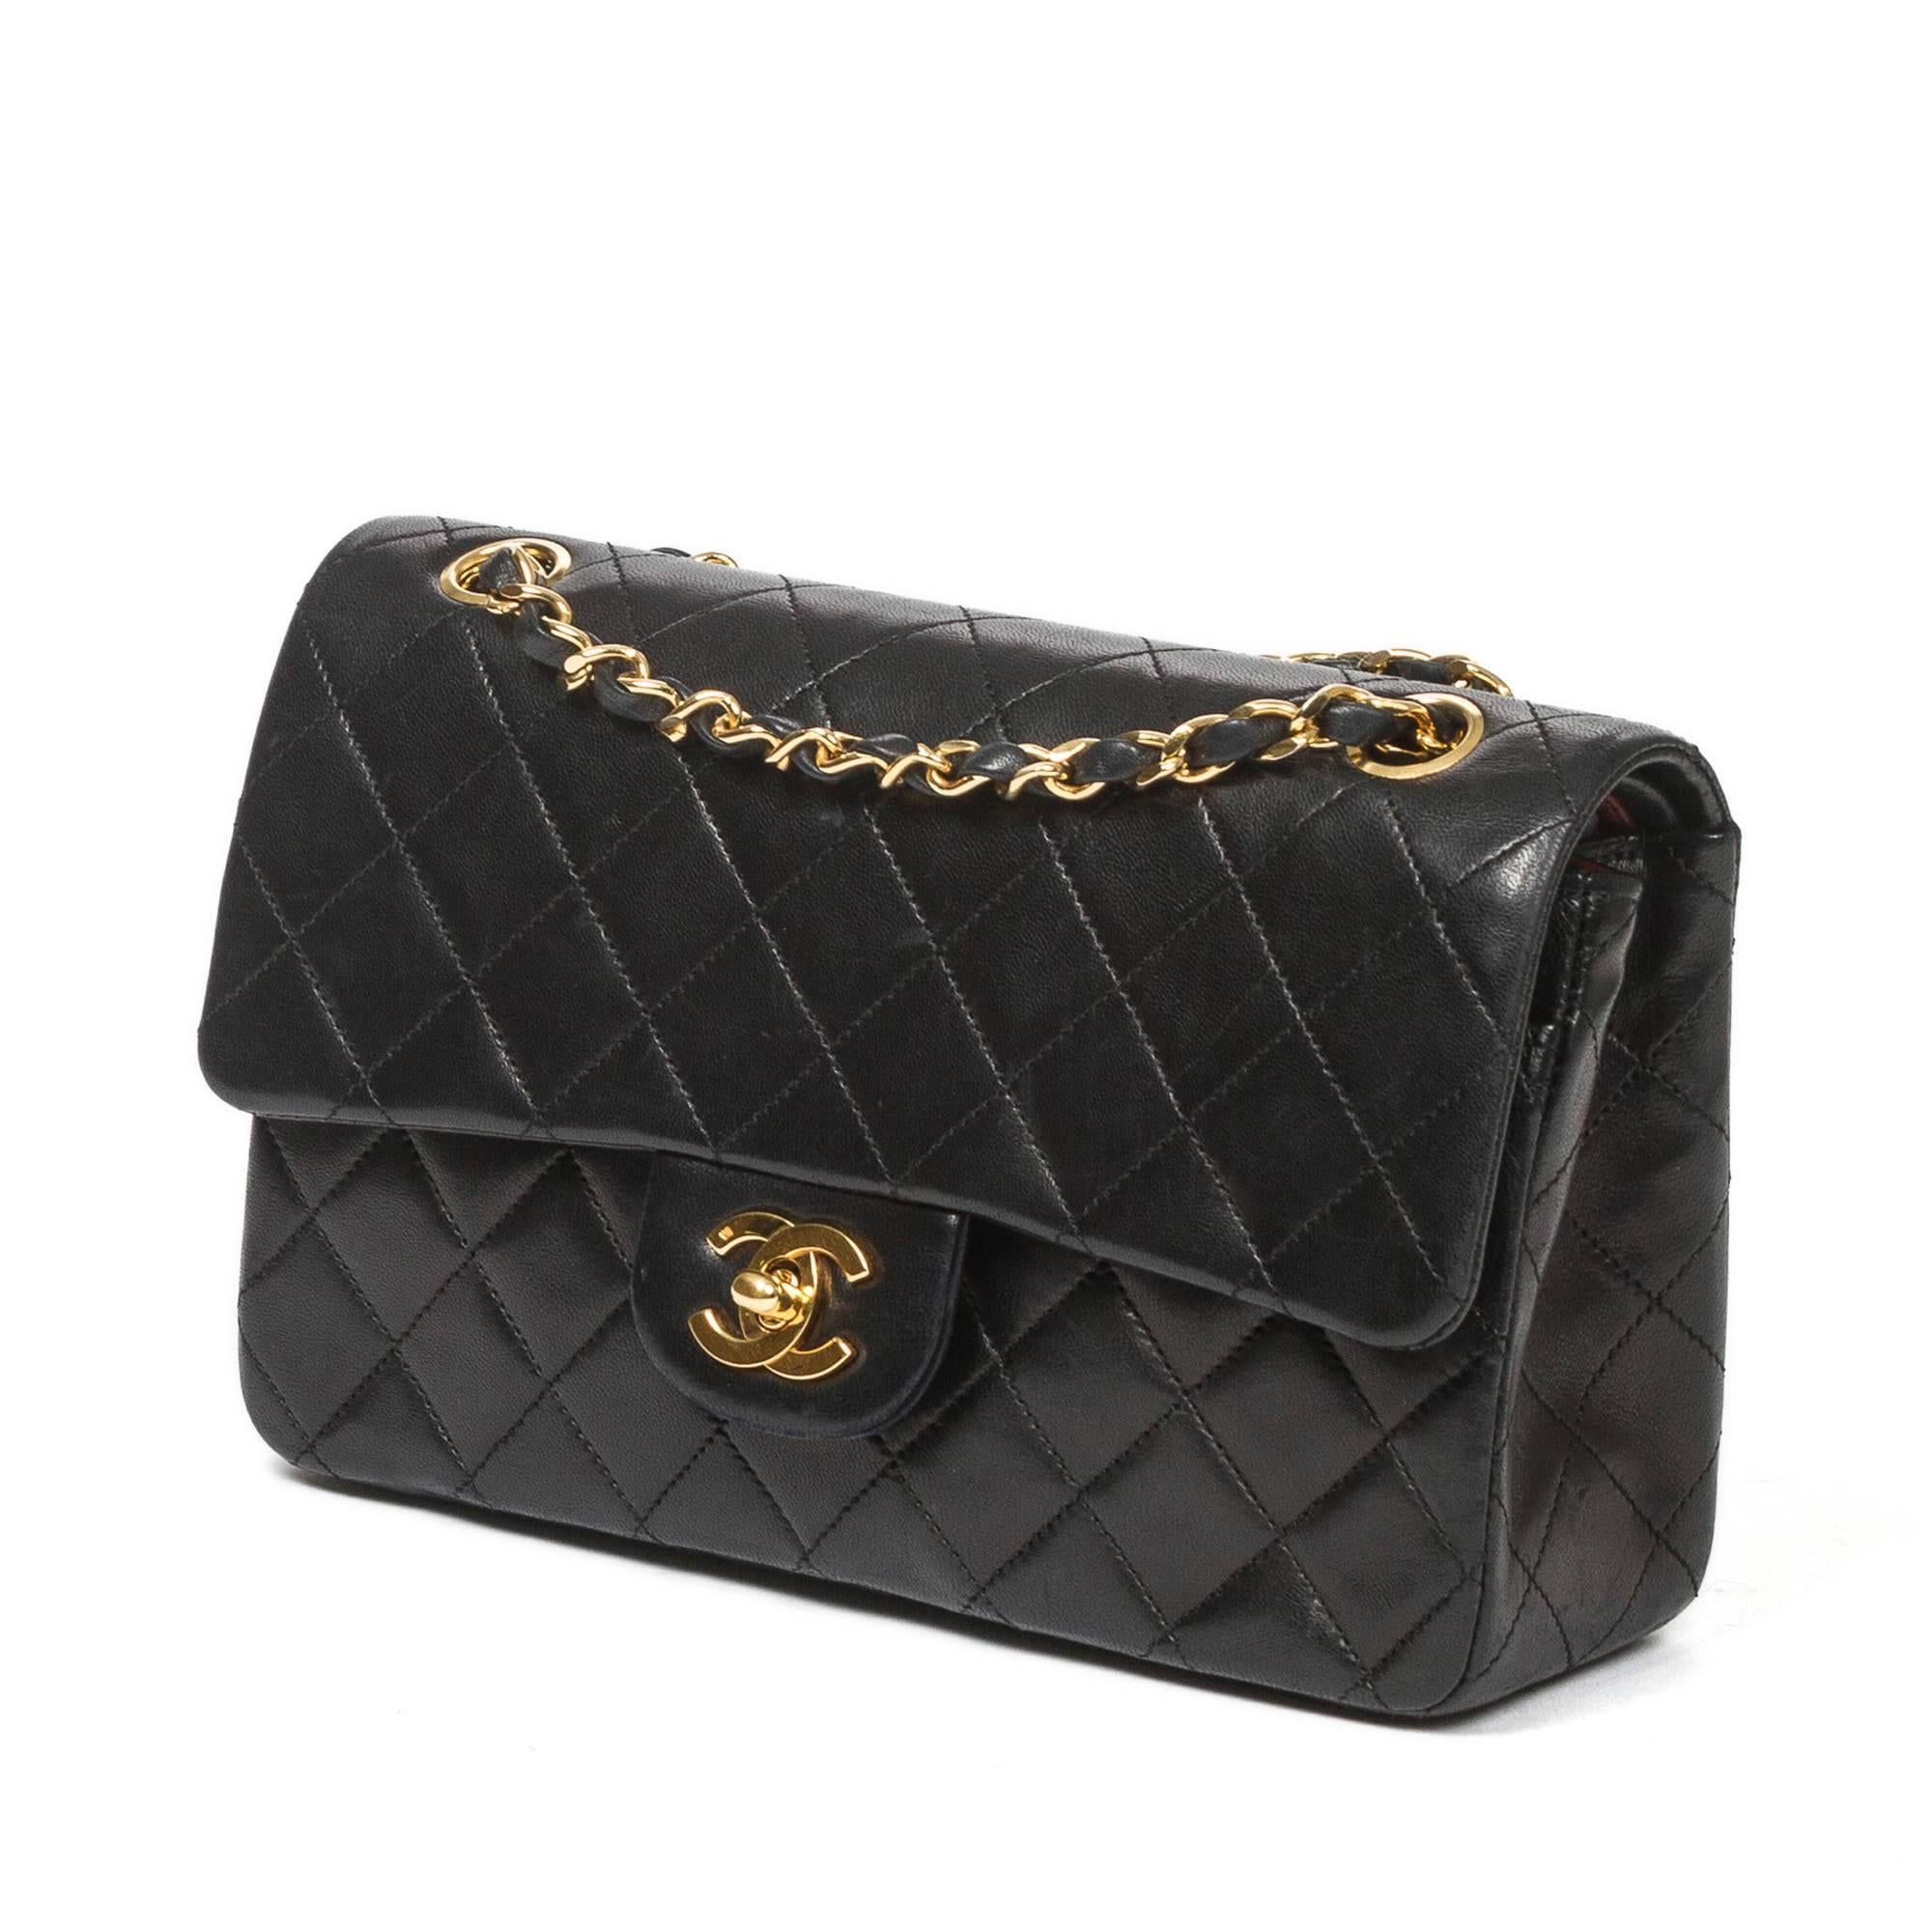 Shoulder bag Chanel Classic Double Flap in black leather. Production code of this product is 3077009. This product is in very good condition. It was a little bit wear and its shape is perfect. It presents no track of wear. All essentials parts are